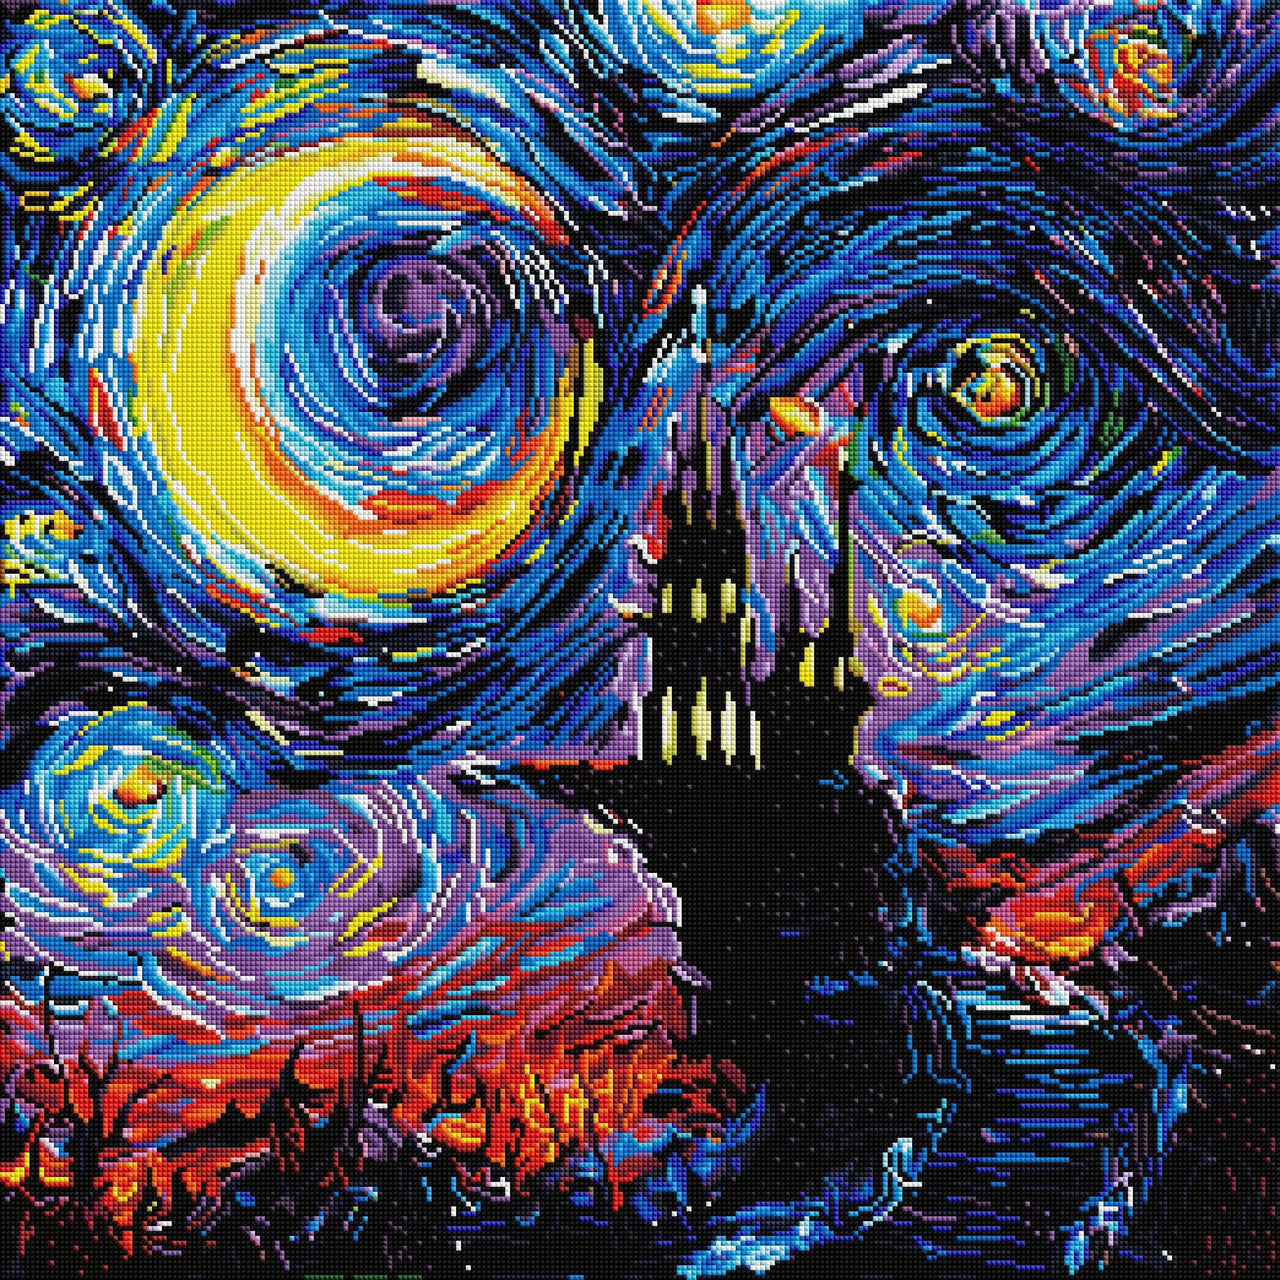 Diamond Painting The Haunting of van Gogh 25.6" x 25.6" (65cm x 65cm) / Square with 37 Colors including 4 ABs / 68,121